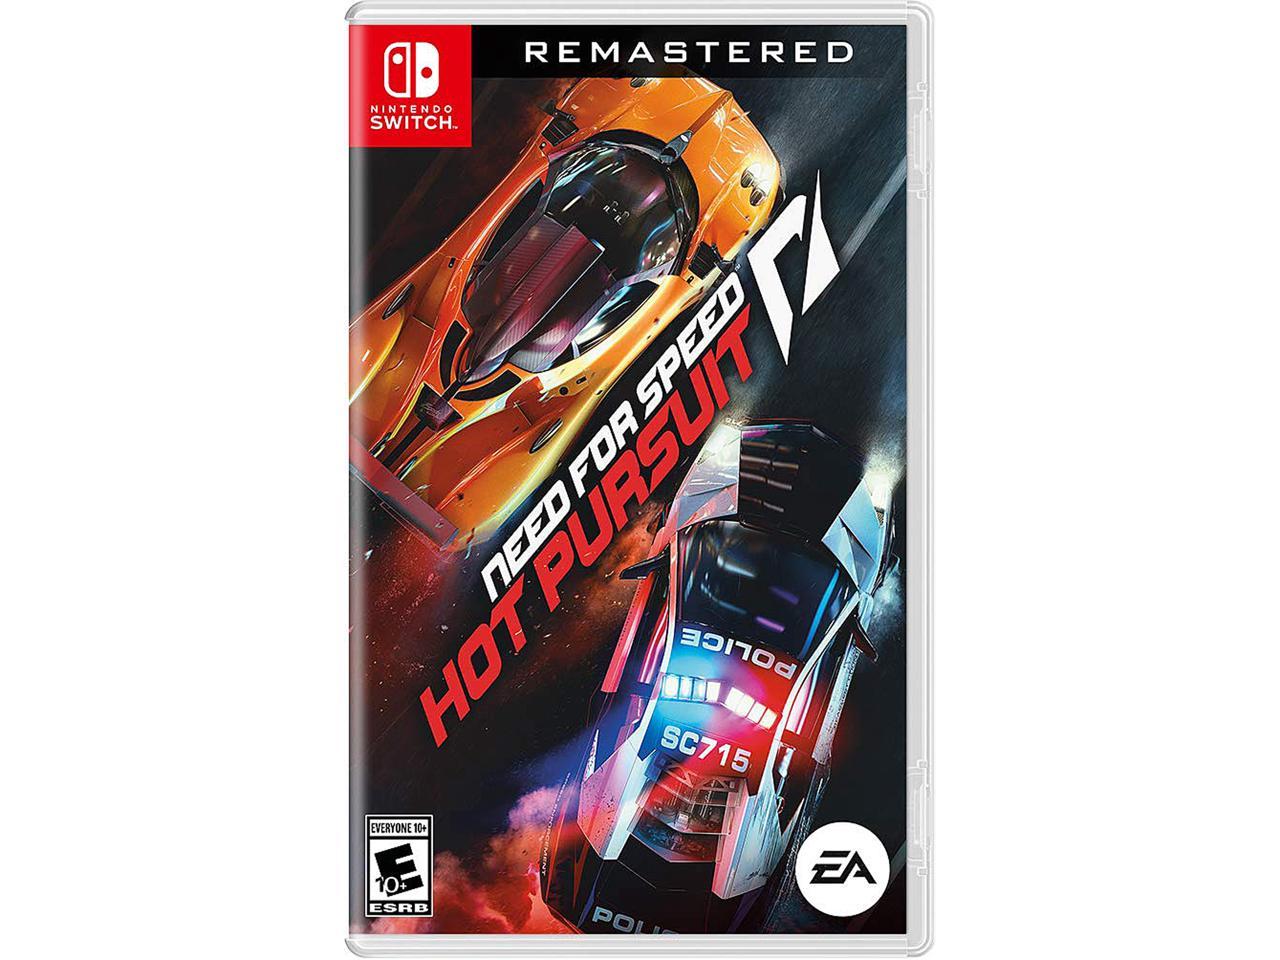 Nfs hot pursuit remastered steam фото 107